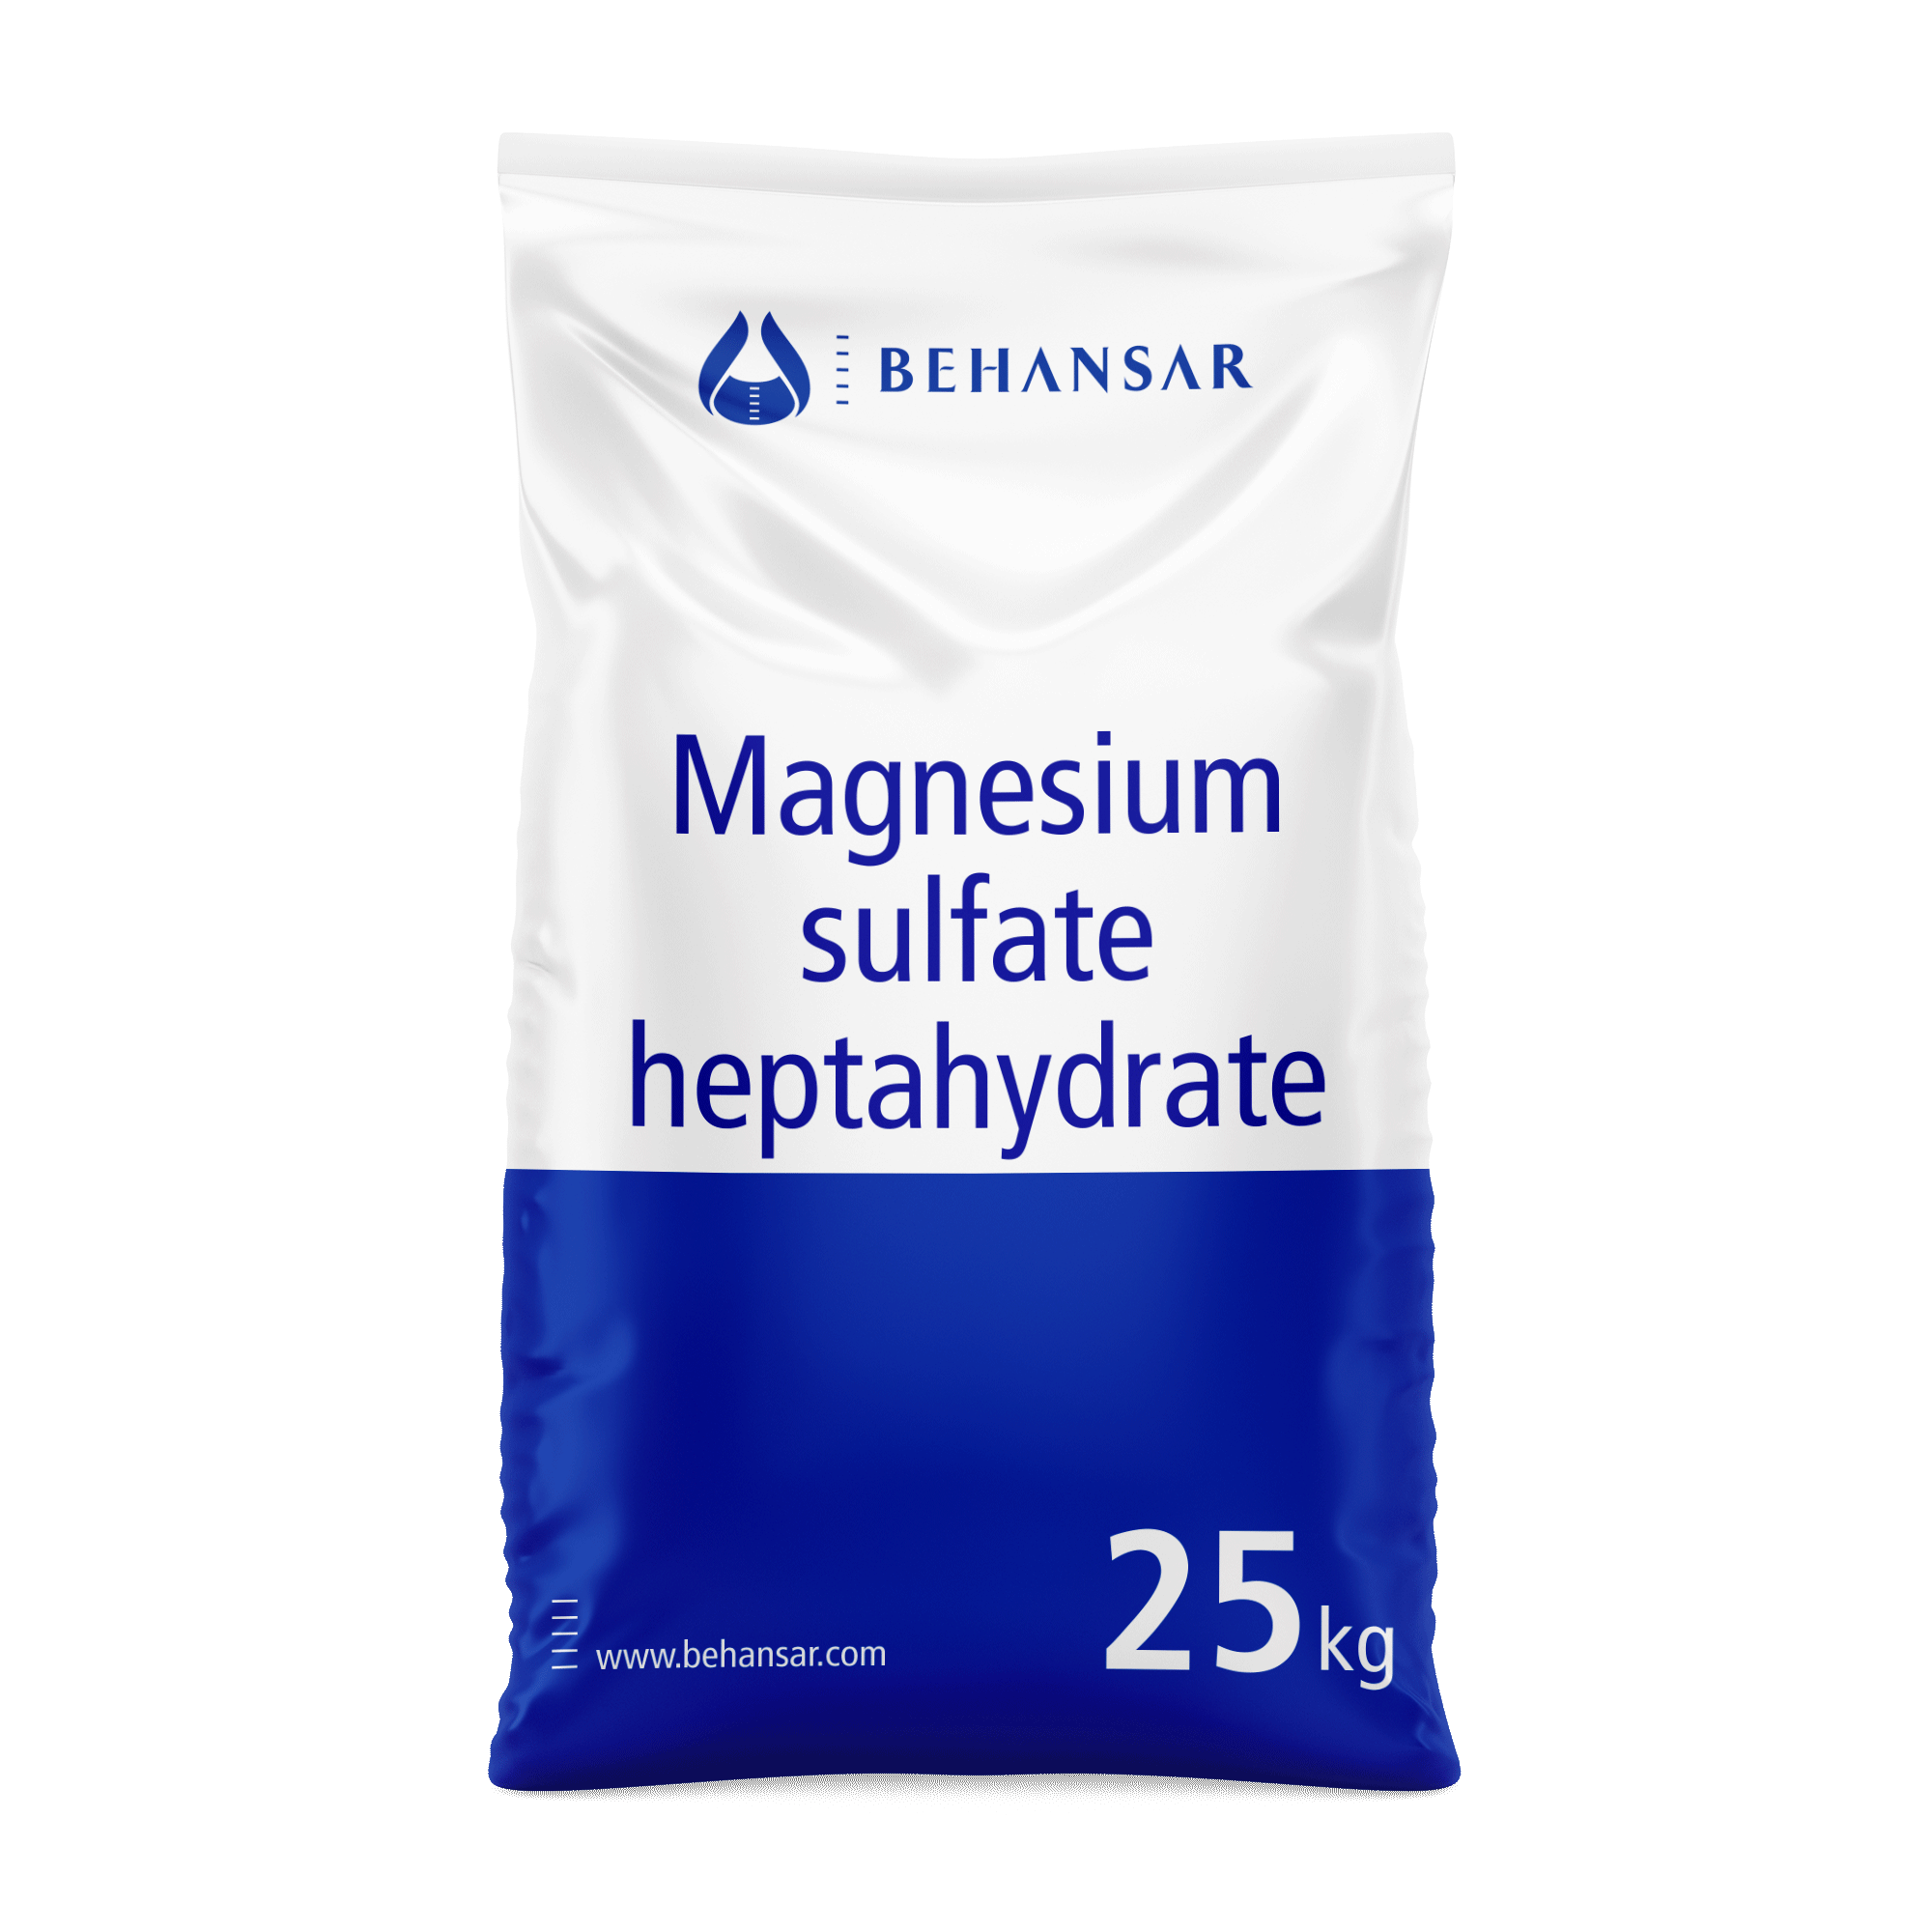 Magnesium sulfate heptahydrate is one of the products of Behansar Co